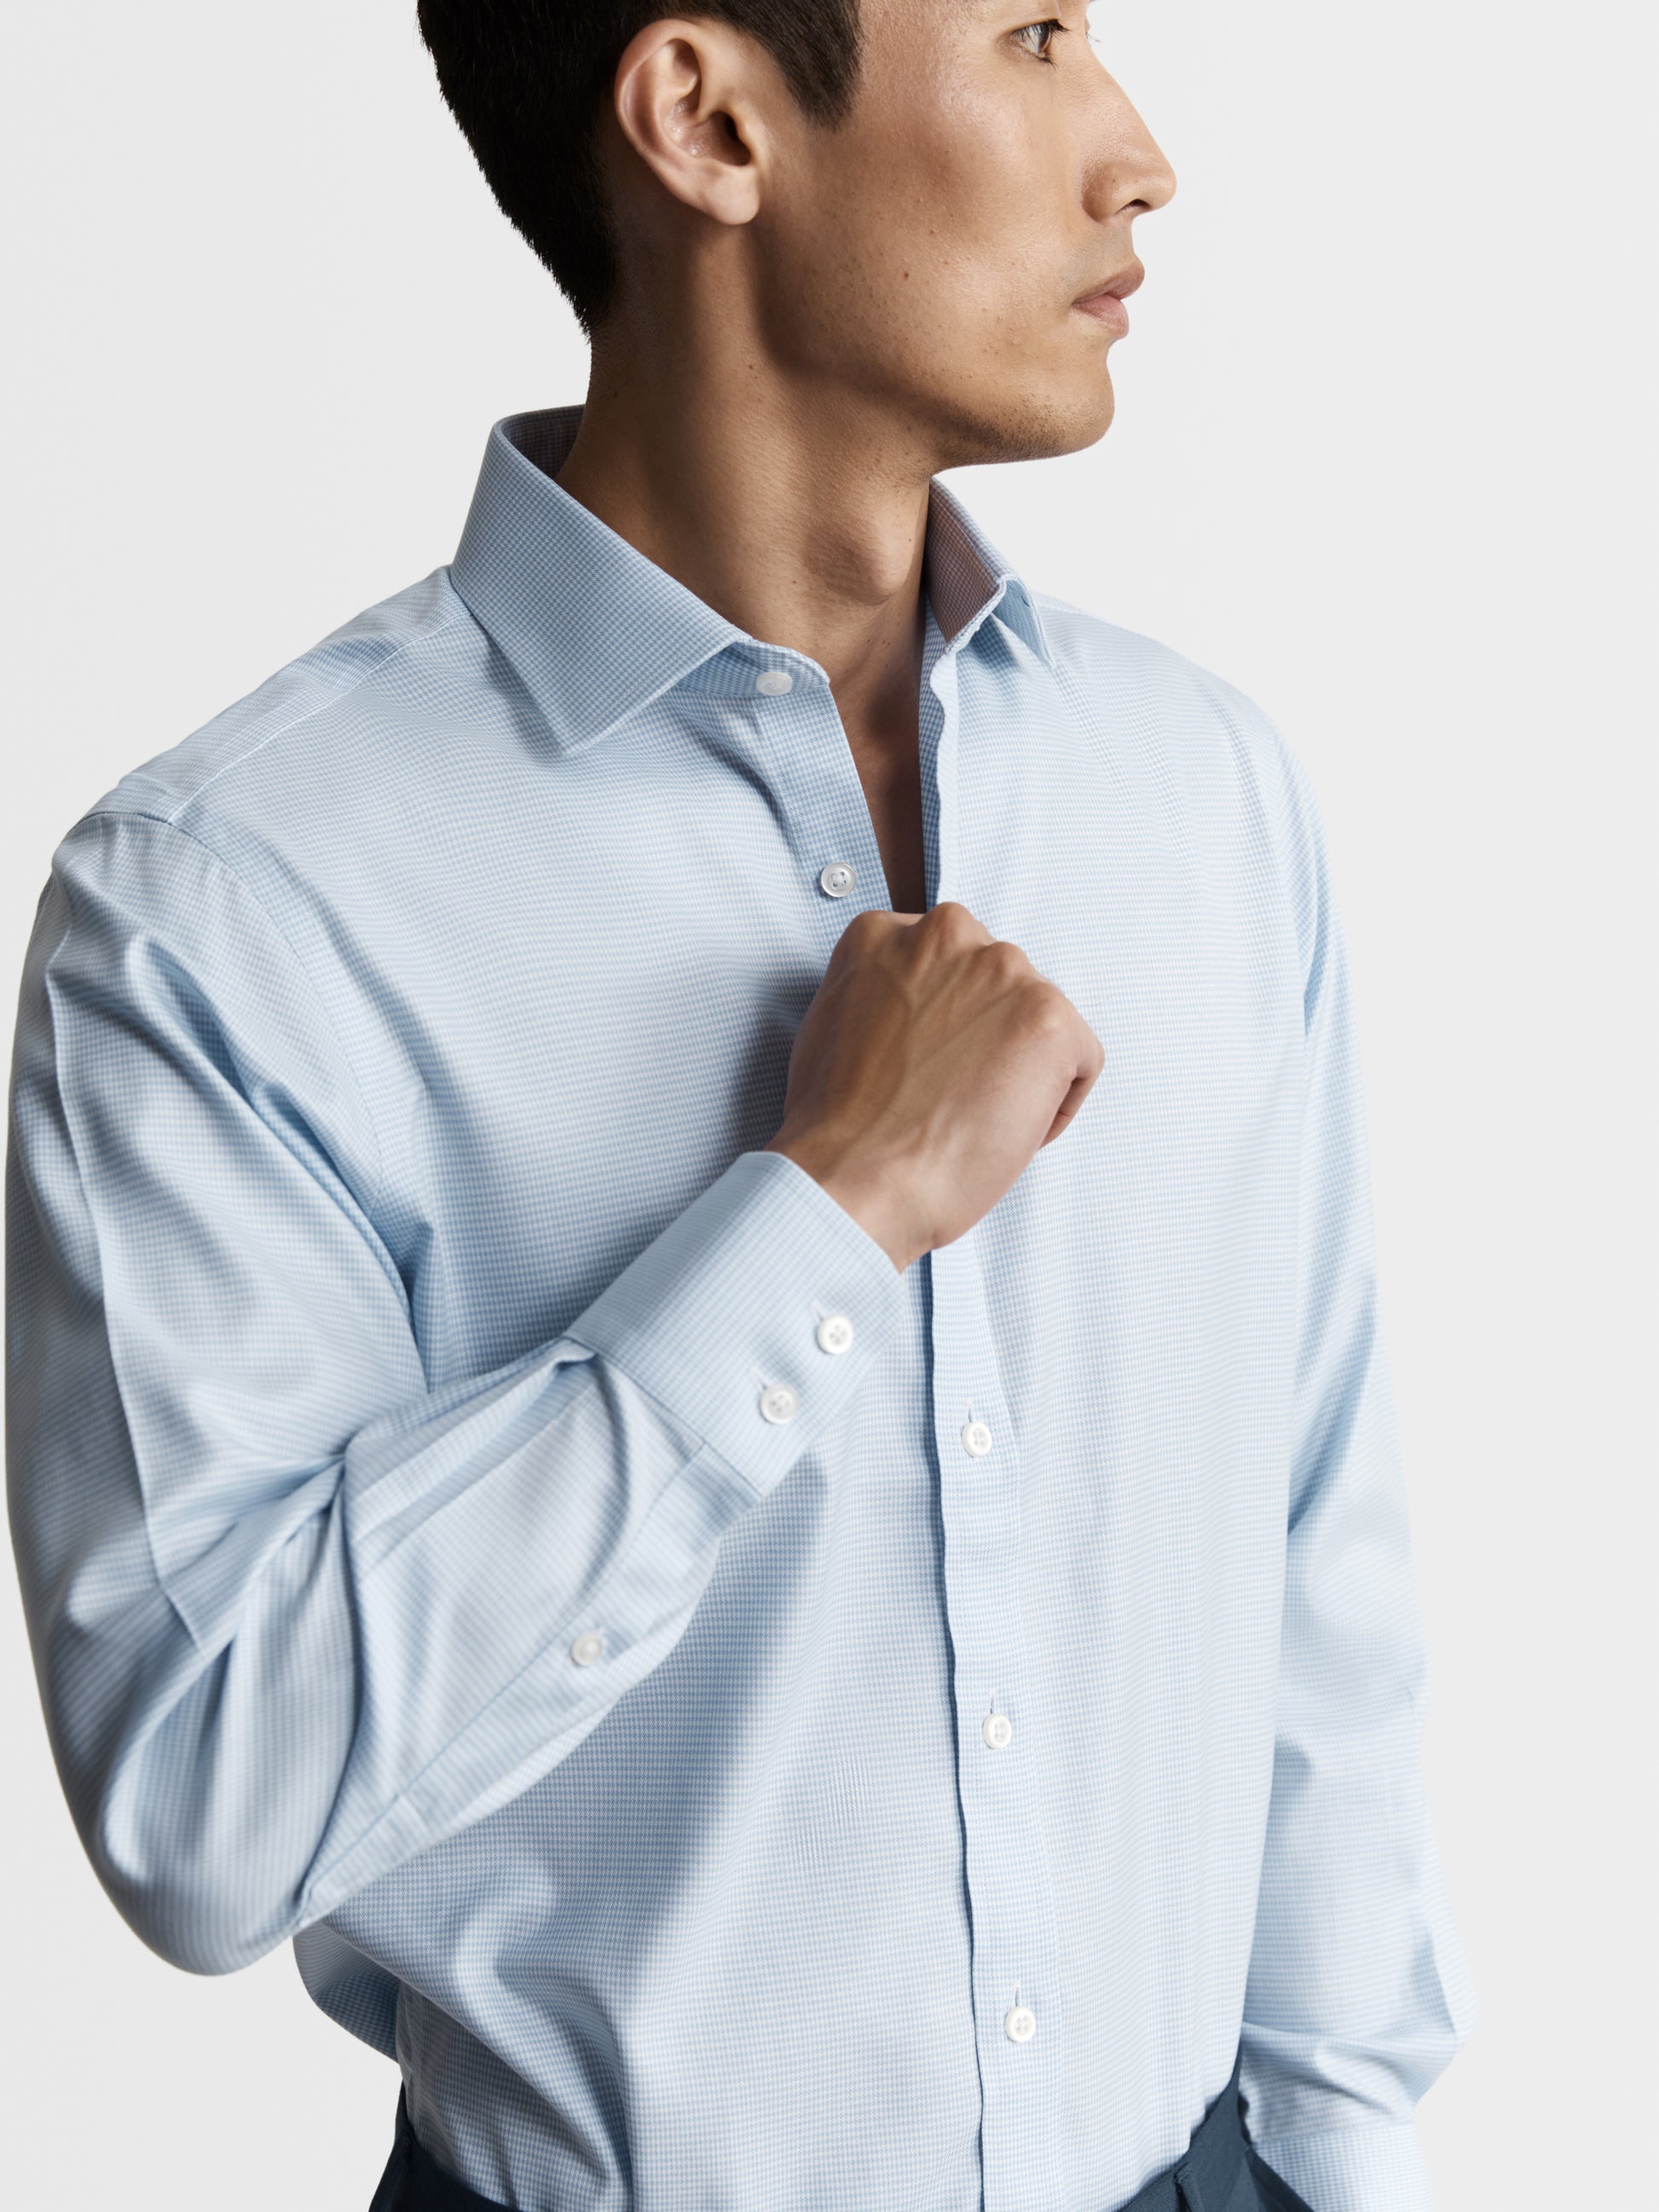 Image 2 of Non-Iron Light Blue Mini Dogtooth Plain Weave Super Fitted Single Cuff Classic Collar Shirt